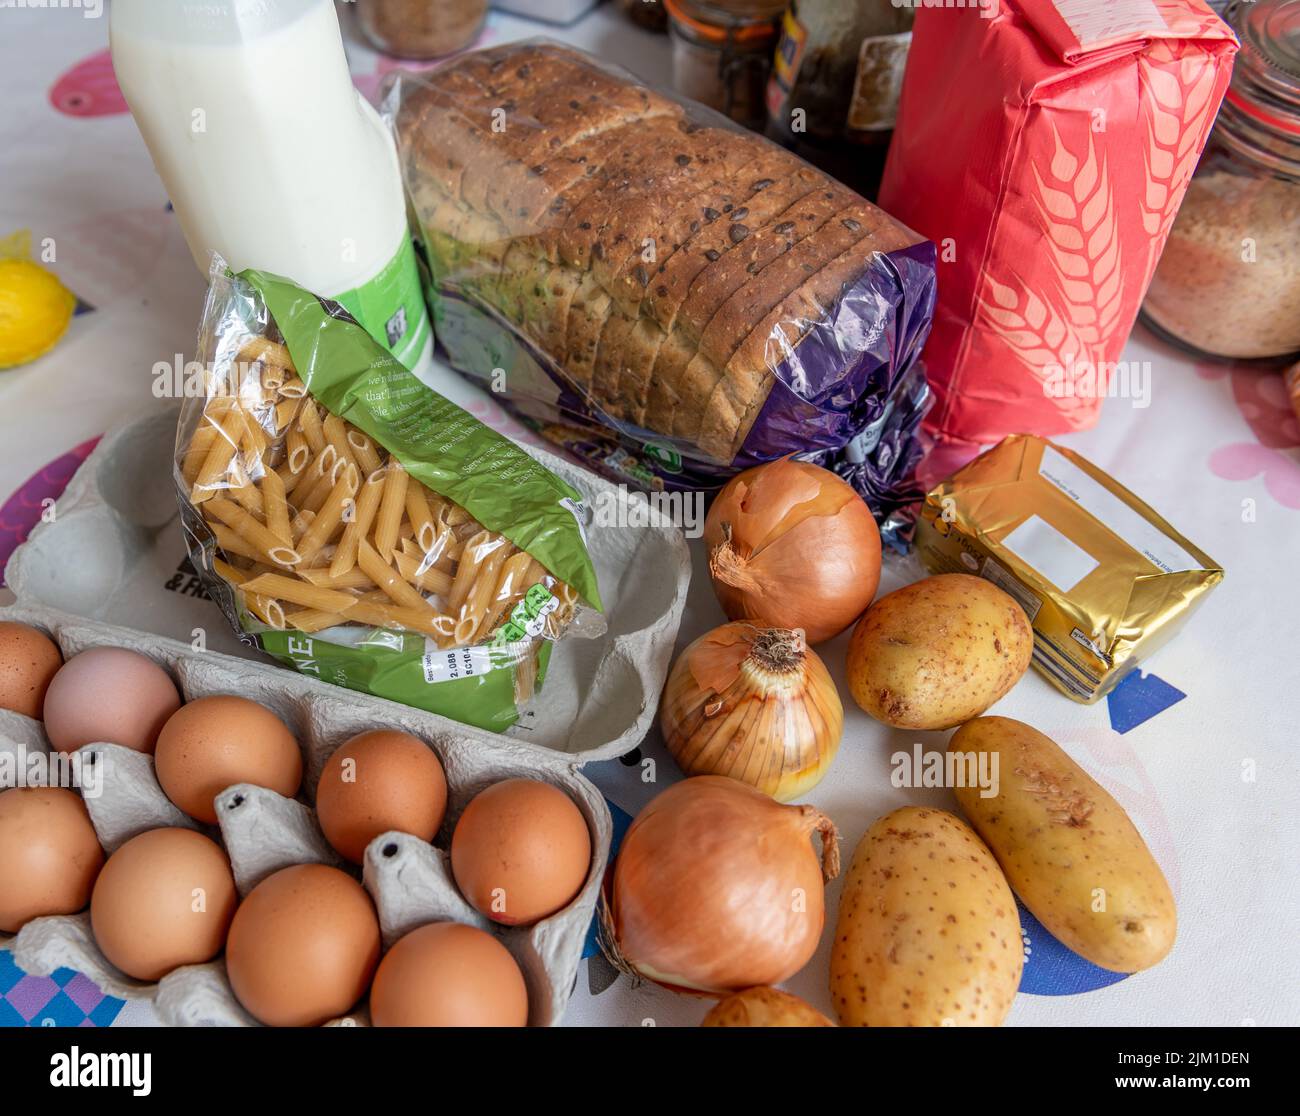 Basic or everyday essential foodstuff on a kitchen table. Food cost, inflation, cost of living concept. Stock Photo